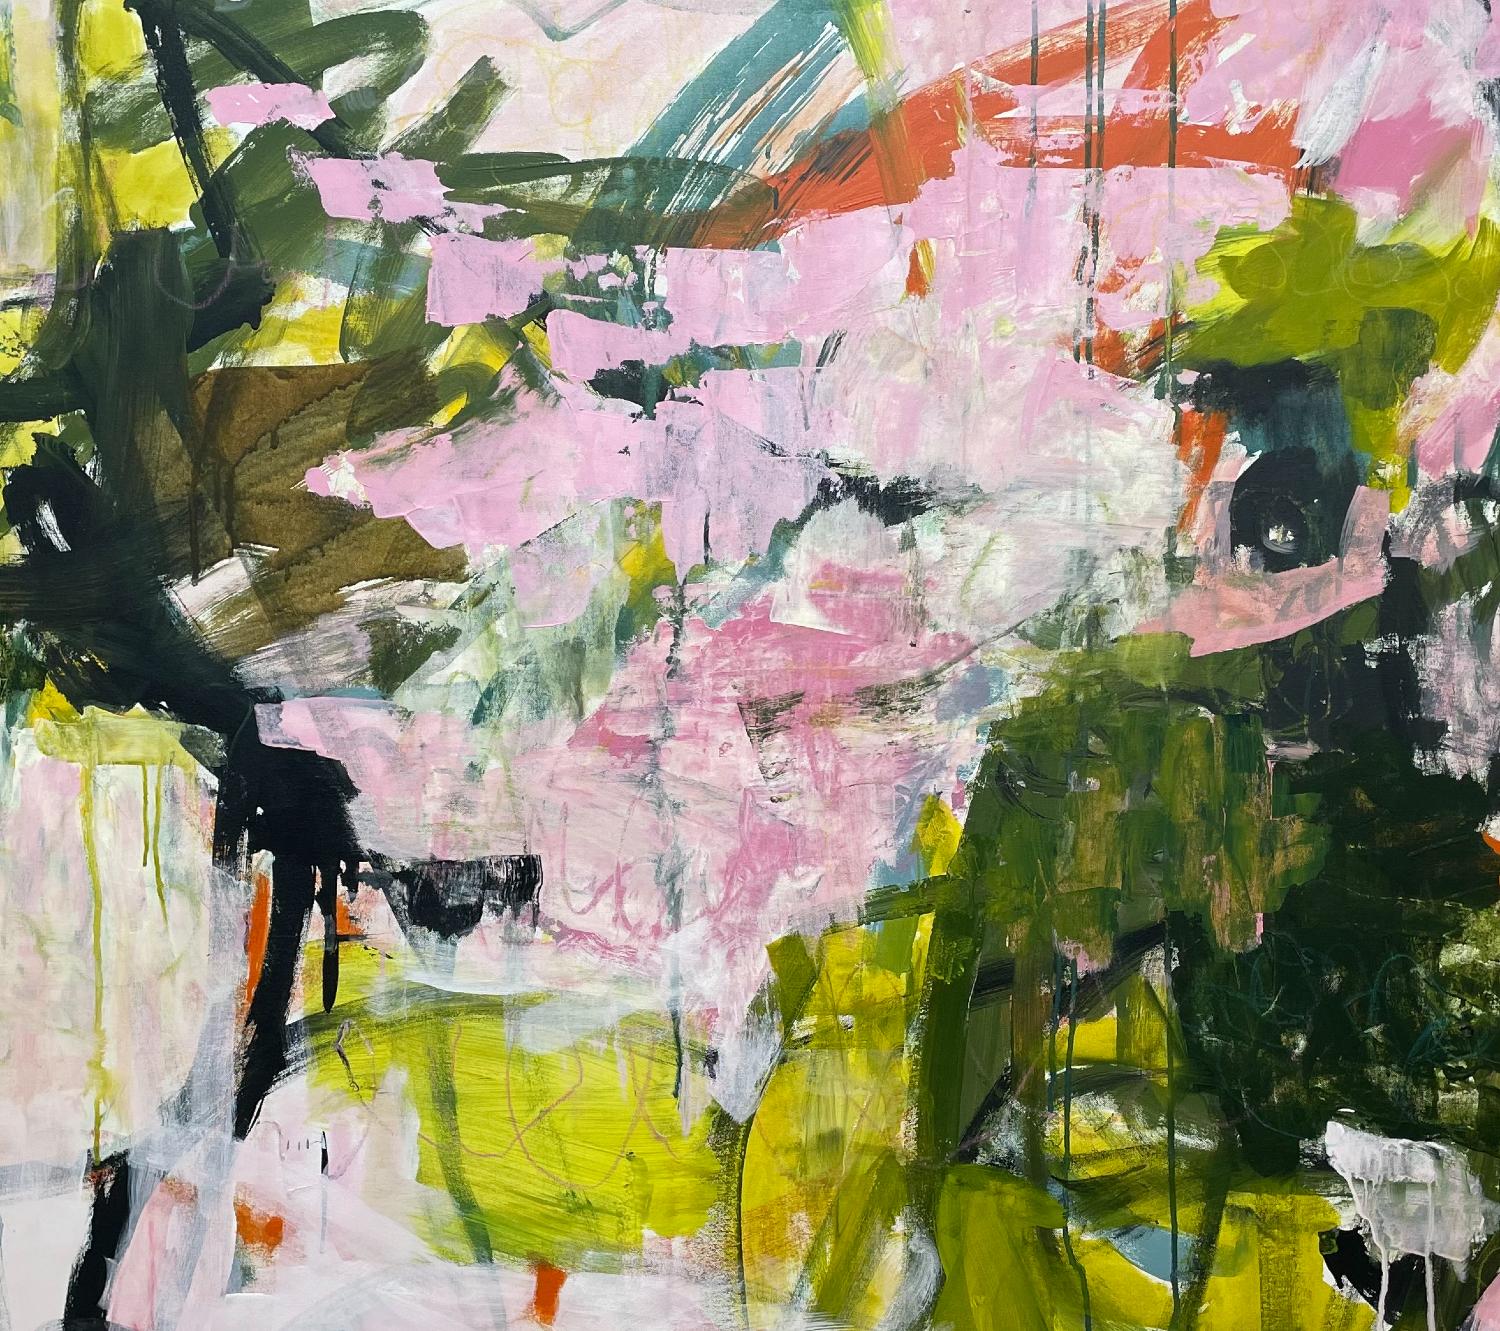 LOST AND FOUND  is a contemporary abstract  painting by Texan artist Eleanor McCarthy. Eleanor McCarthy uses acrylic paints on canvas to create the soothing colors in her new contemporary  abstract paintings that were just painted in 2023.  LOOK FOR